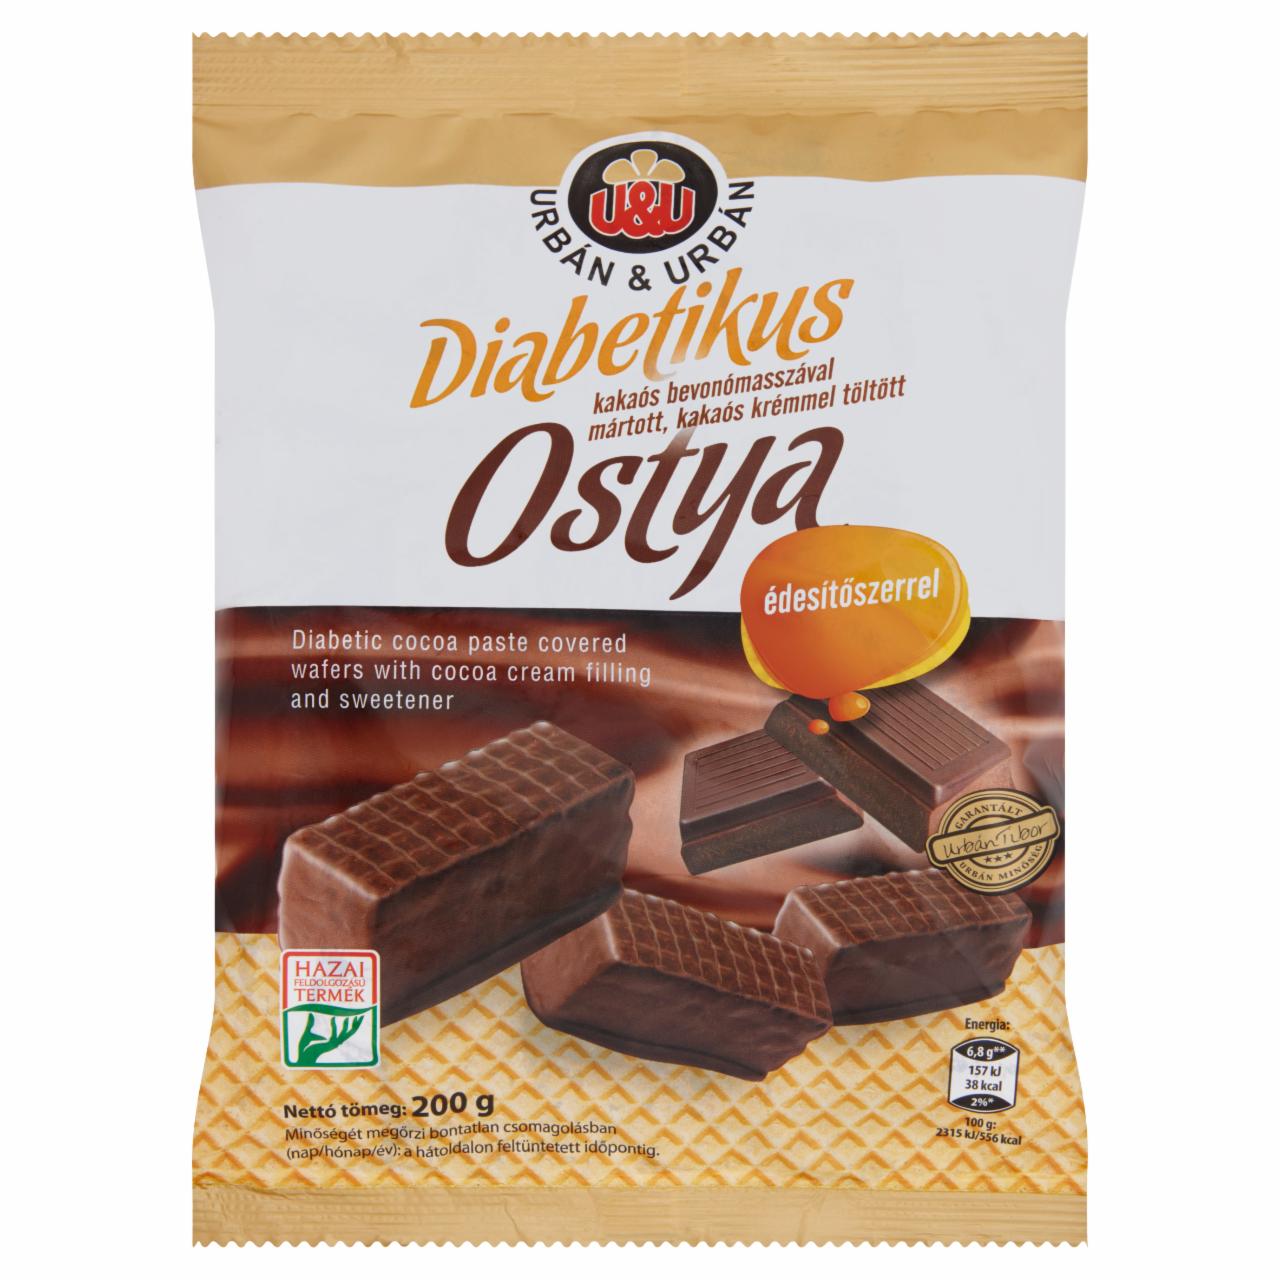 Photo - Urbán & Urbán Diabetic Cocoa Paste Covered Wafers with Cocoa Cream Filling and Sweetener 200 g